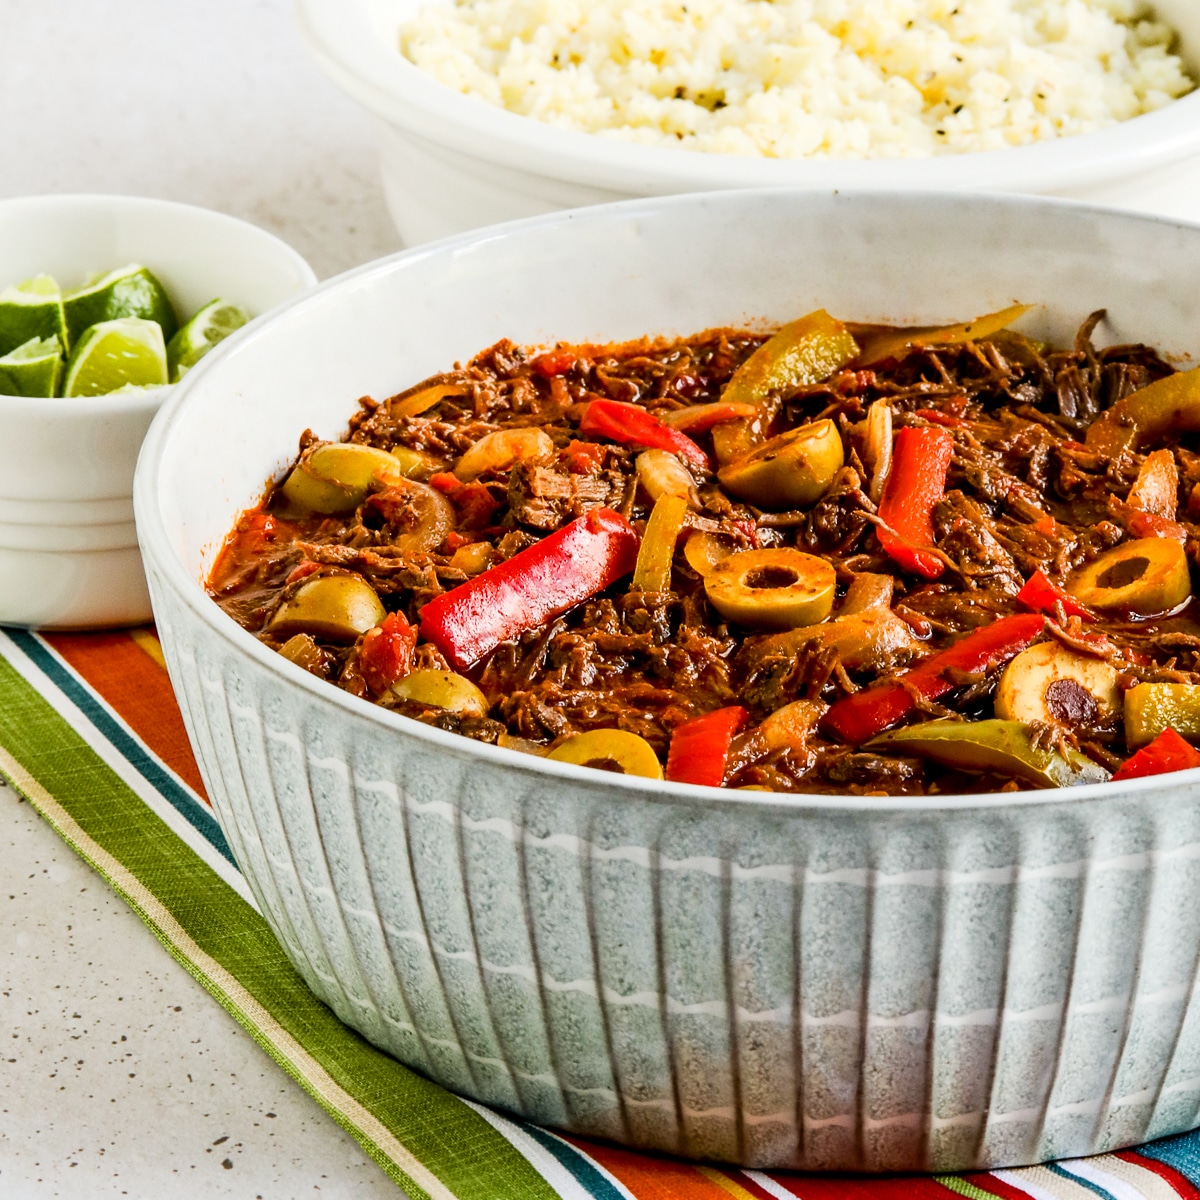 Square image of Ropa Vieja shown in serving bowl with limes and side dish.